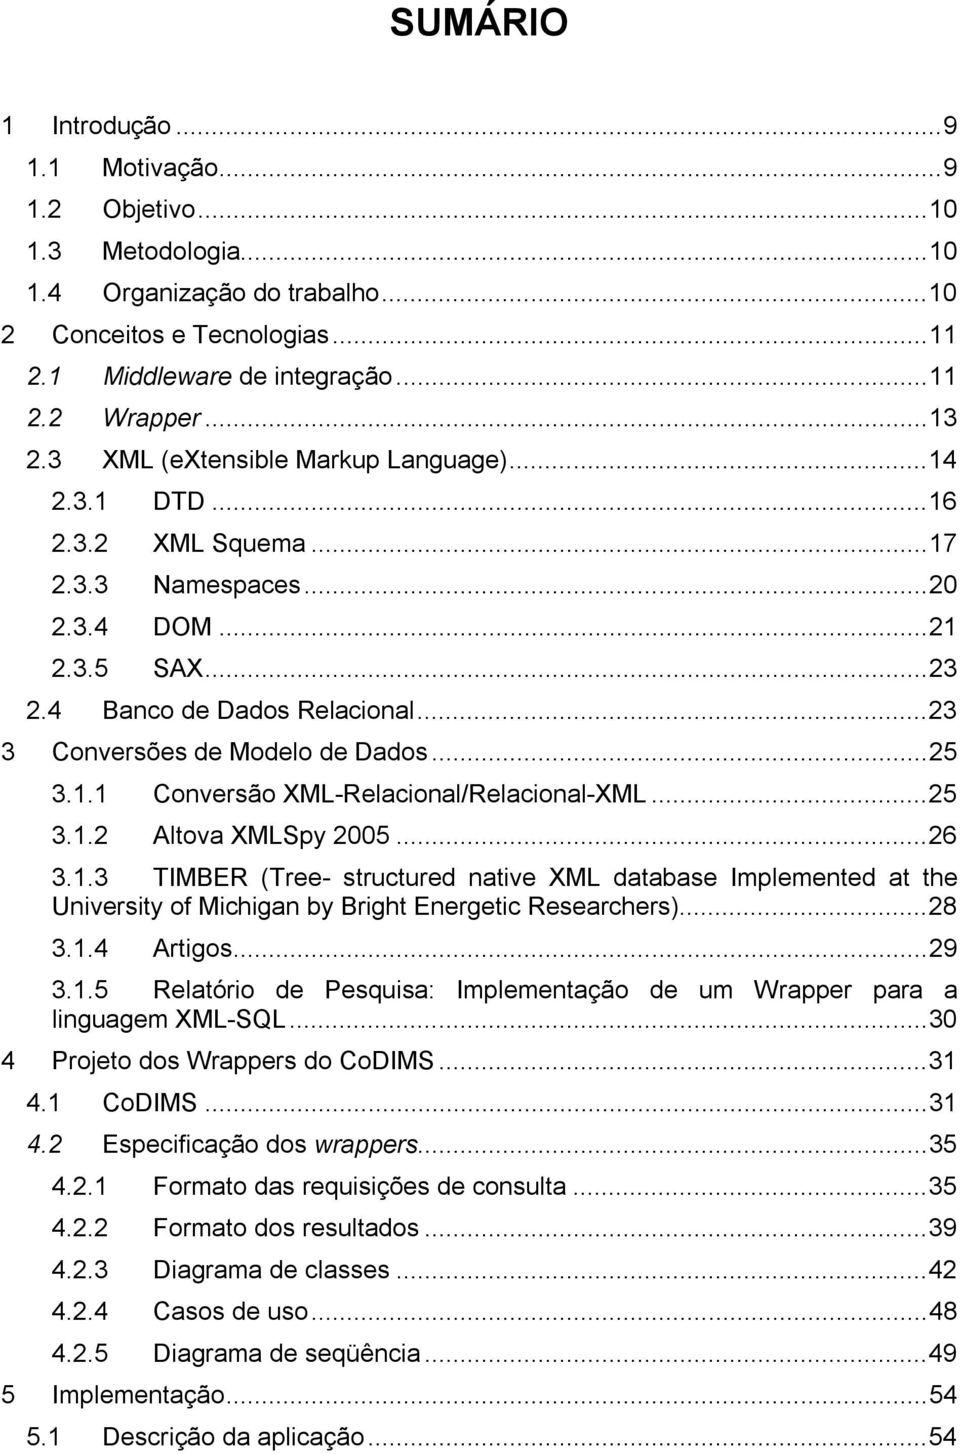 ..25 3.1.1 Conversão XML-Relacional/Relacional-XML...25 3.1.2 Altova XMLSpy 2005...26 3.1.3 TIMBER (Tree- structured native XML database Implemented at the University of Michigan by Bright Energetic Researchers).